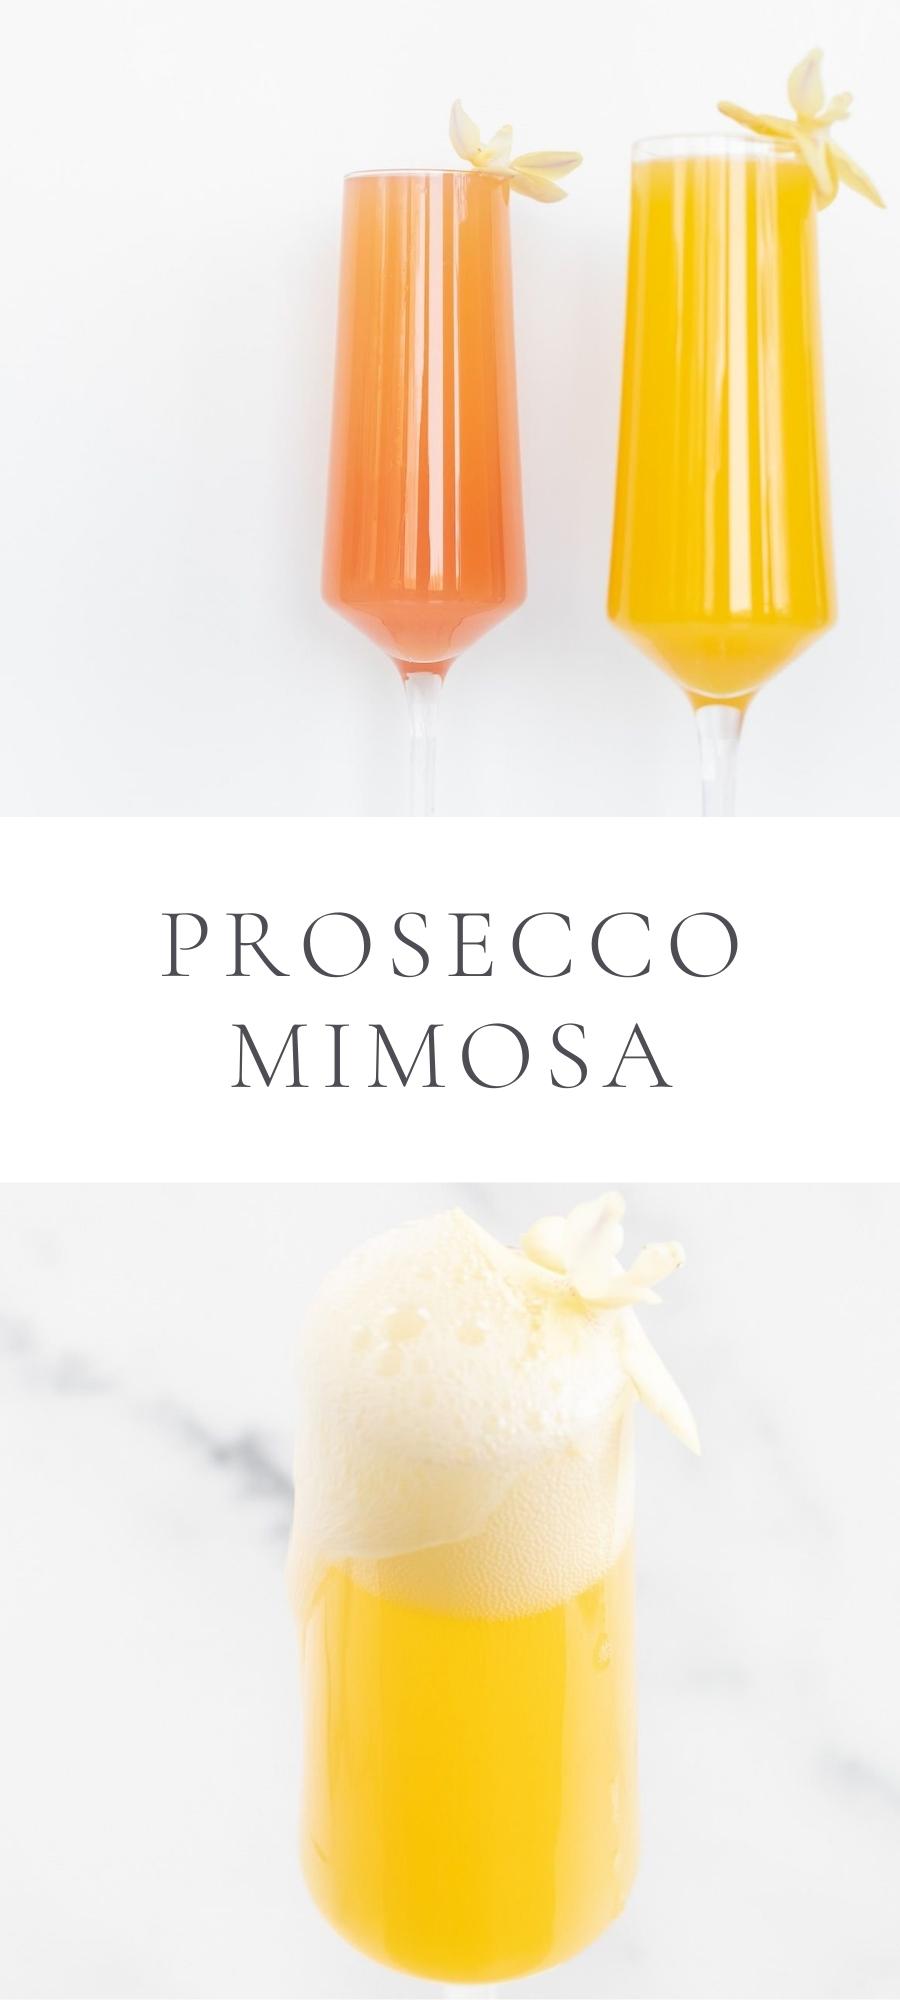 prosecco mimosas with flowers on table